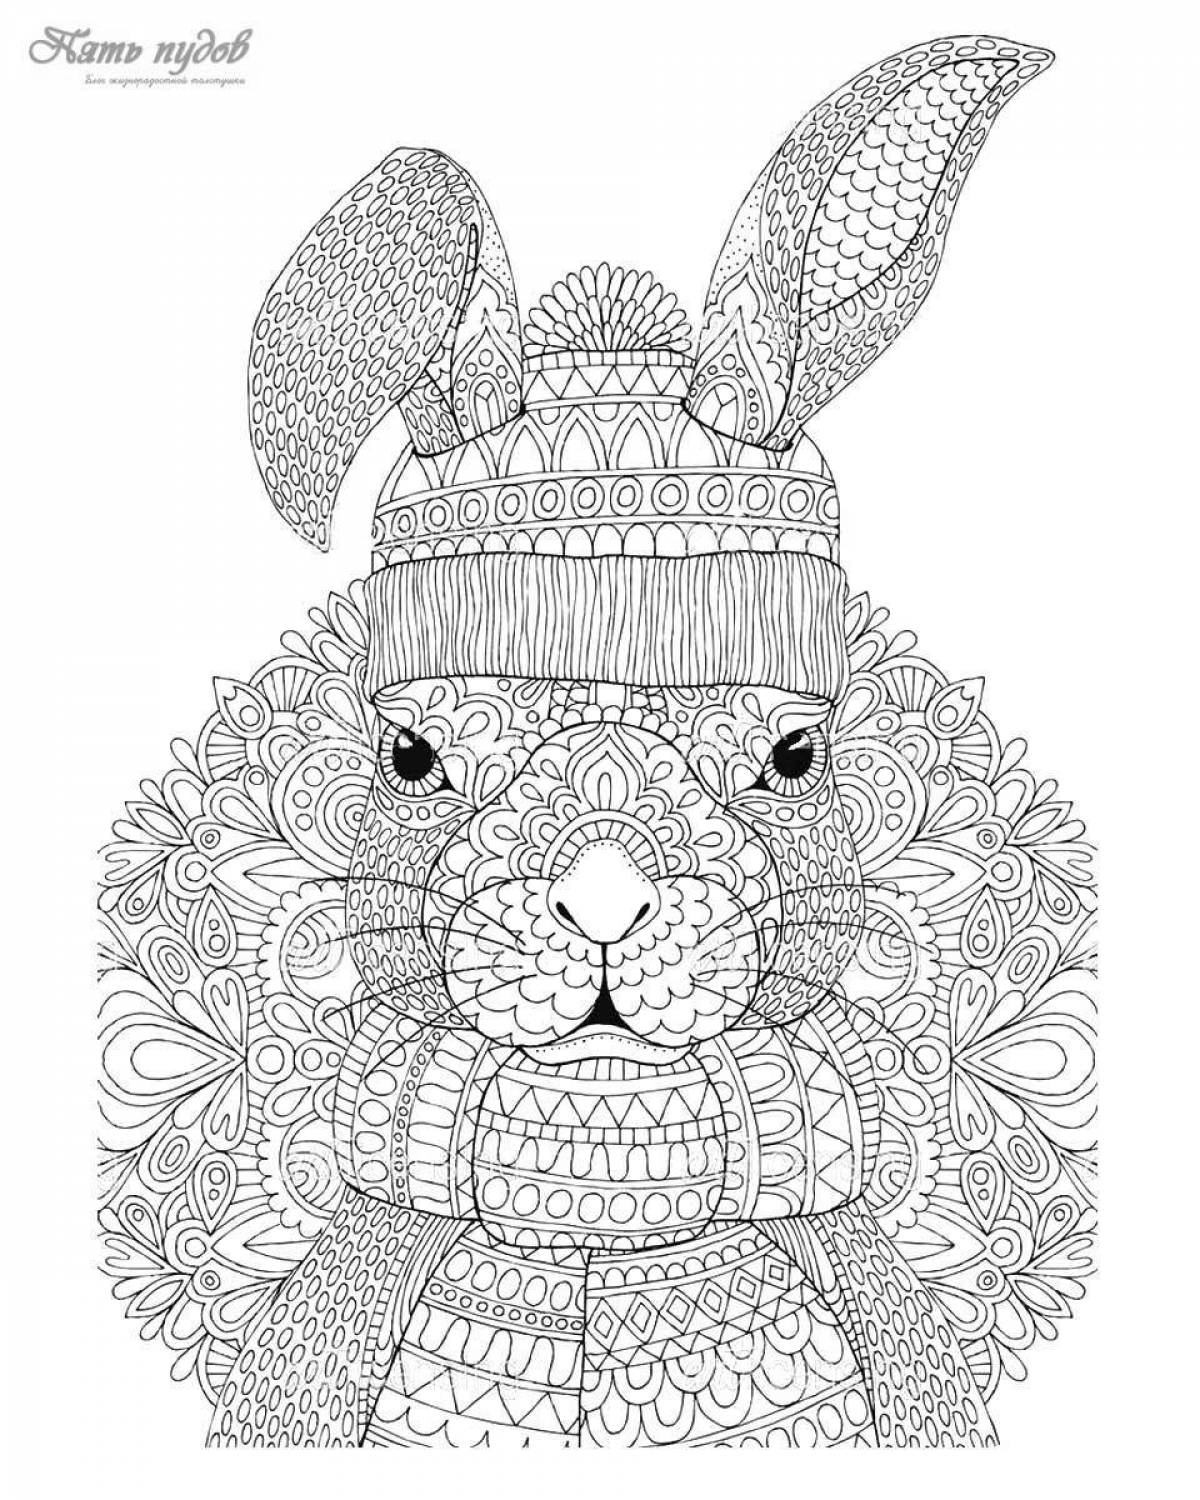 Sparkly anti-stress rabbit coloring book